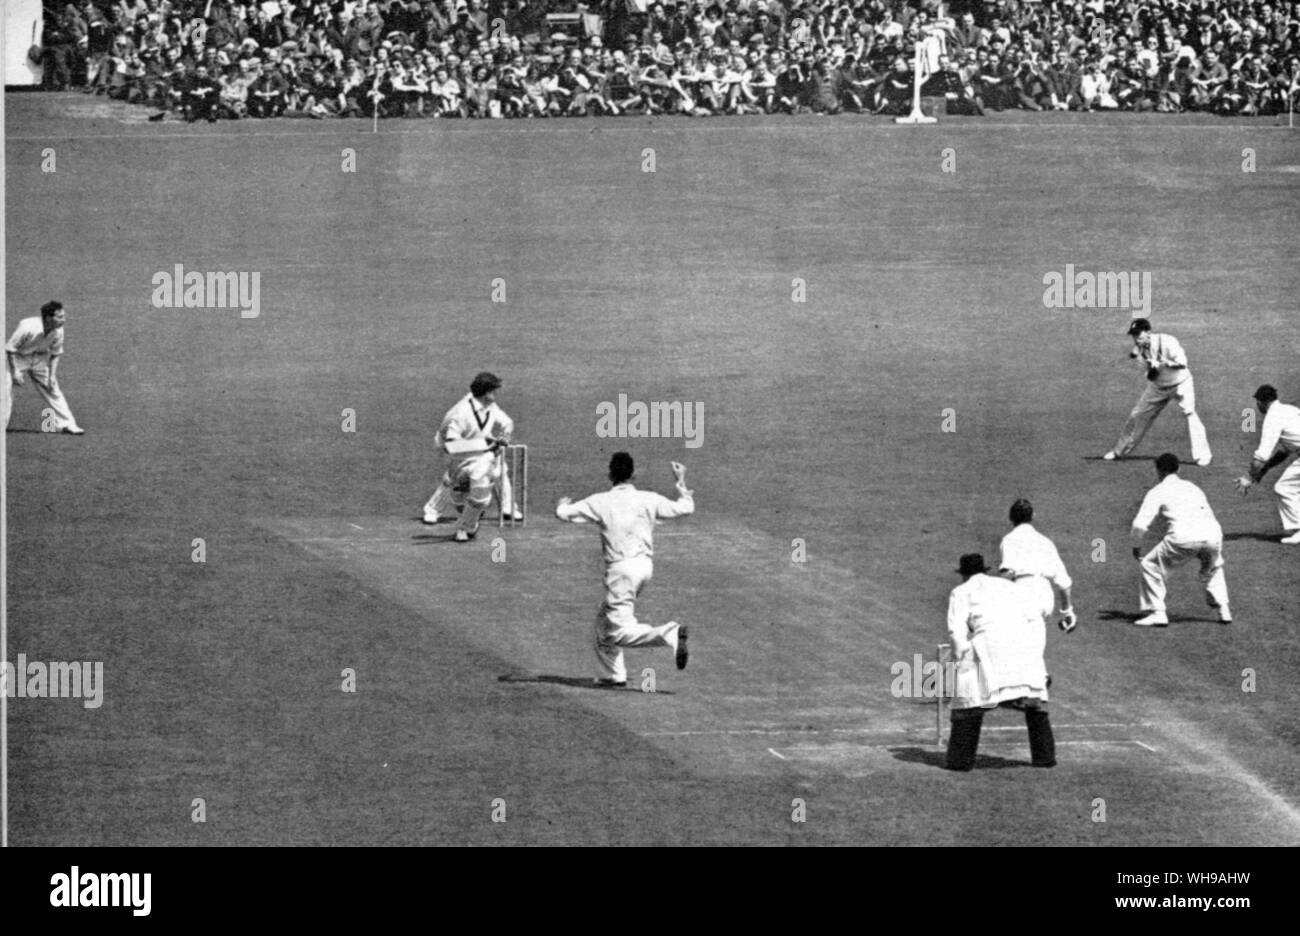 L Hutton catches Bradman at short leg off Bedser in the First Test at Nottingham 1948 Stock Photo